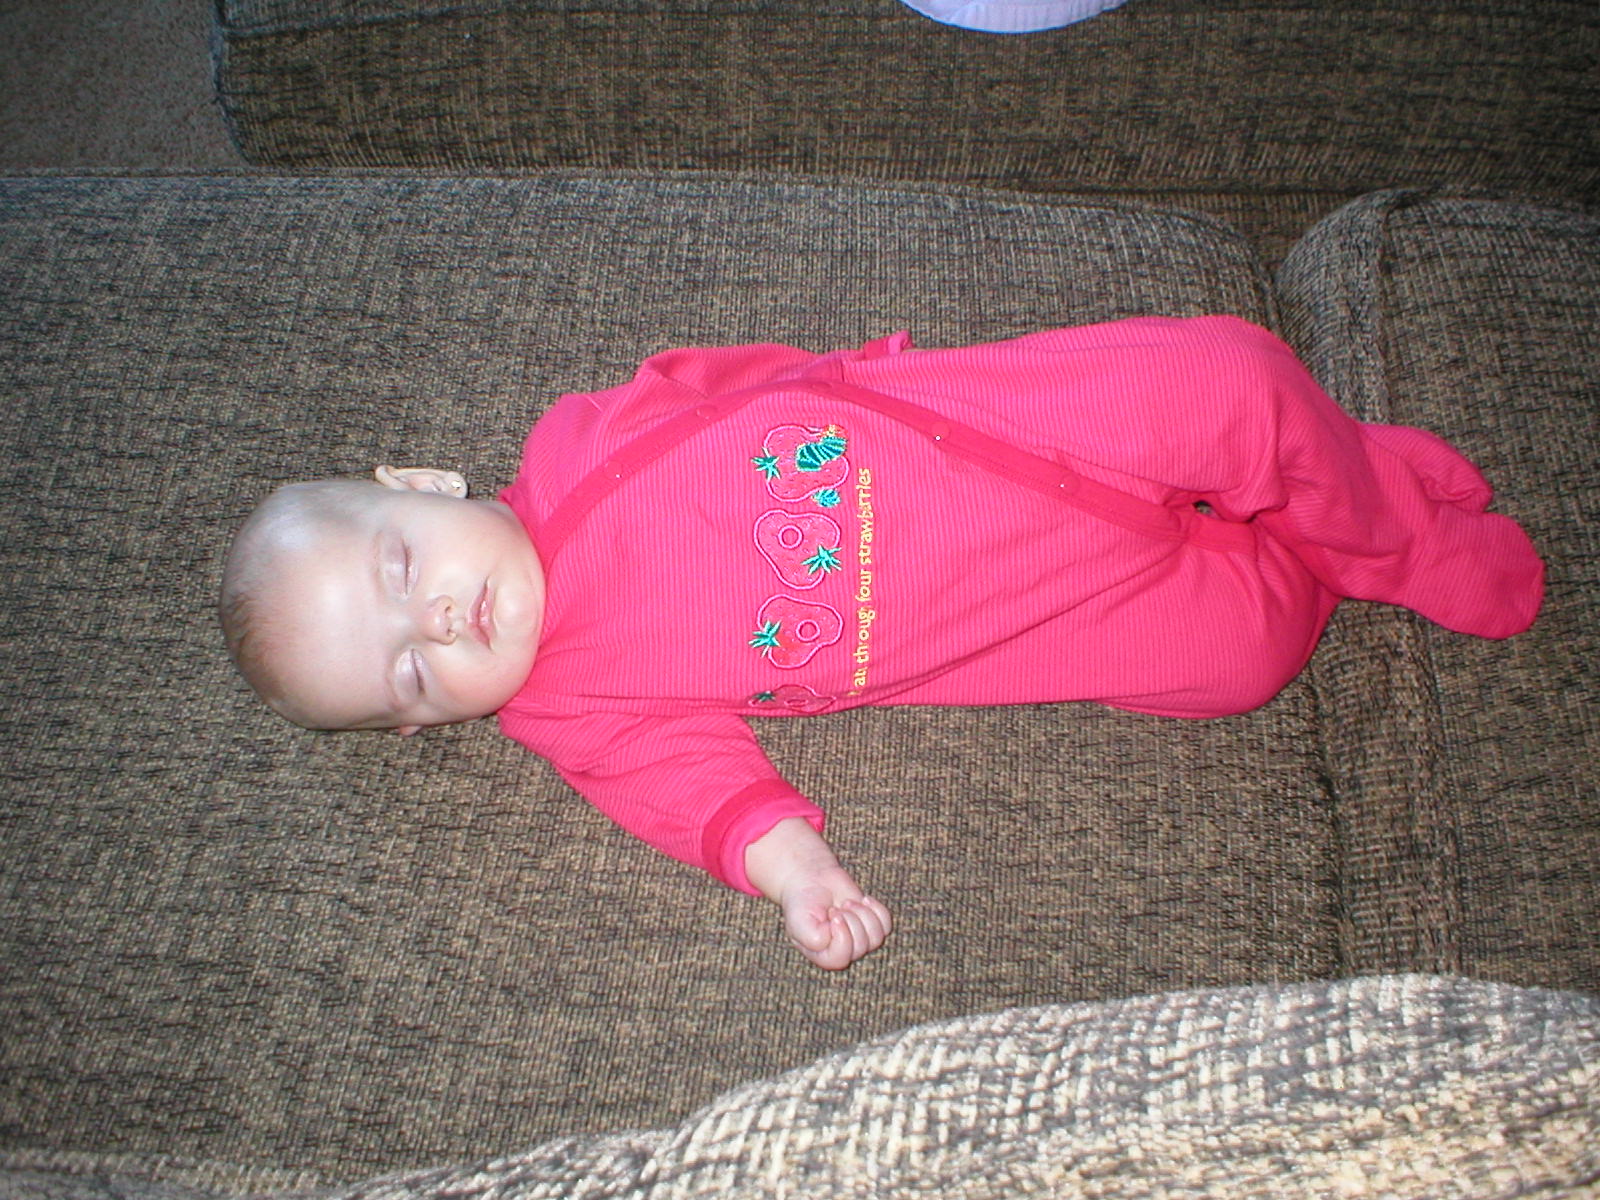 Shhhhh! Asleep in Mom's Favorite Outfit.